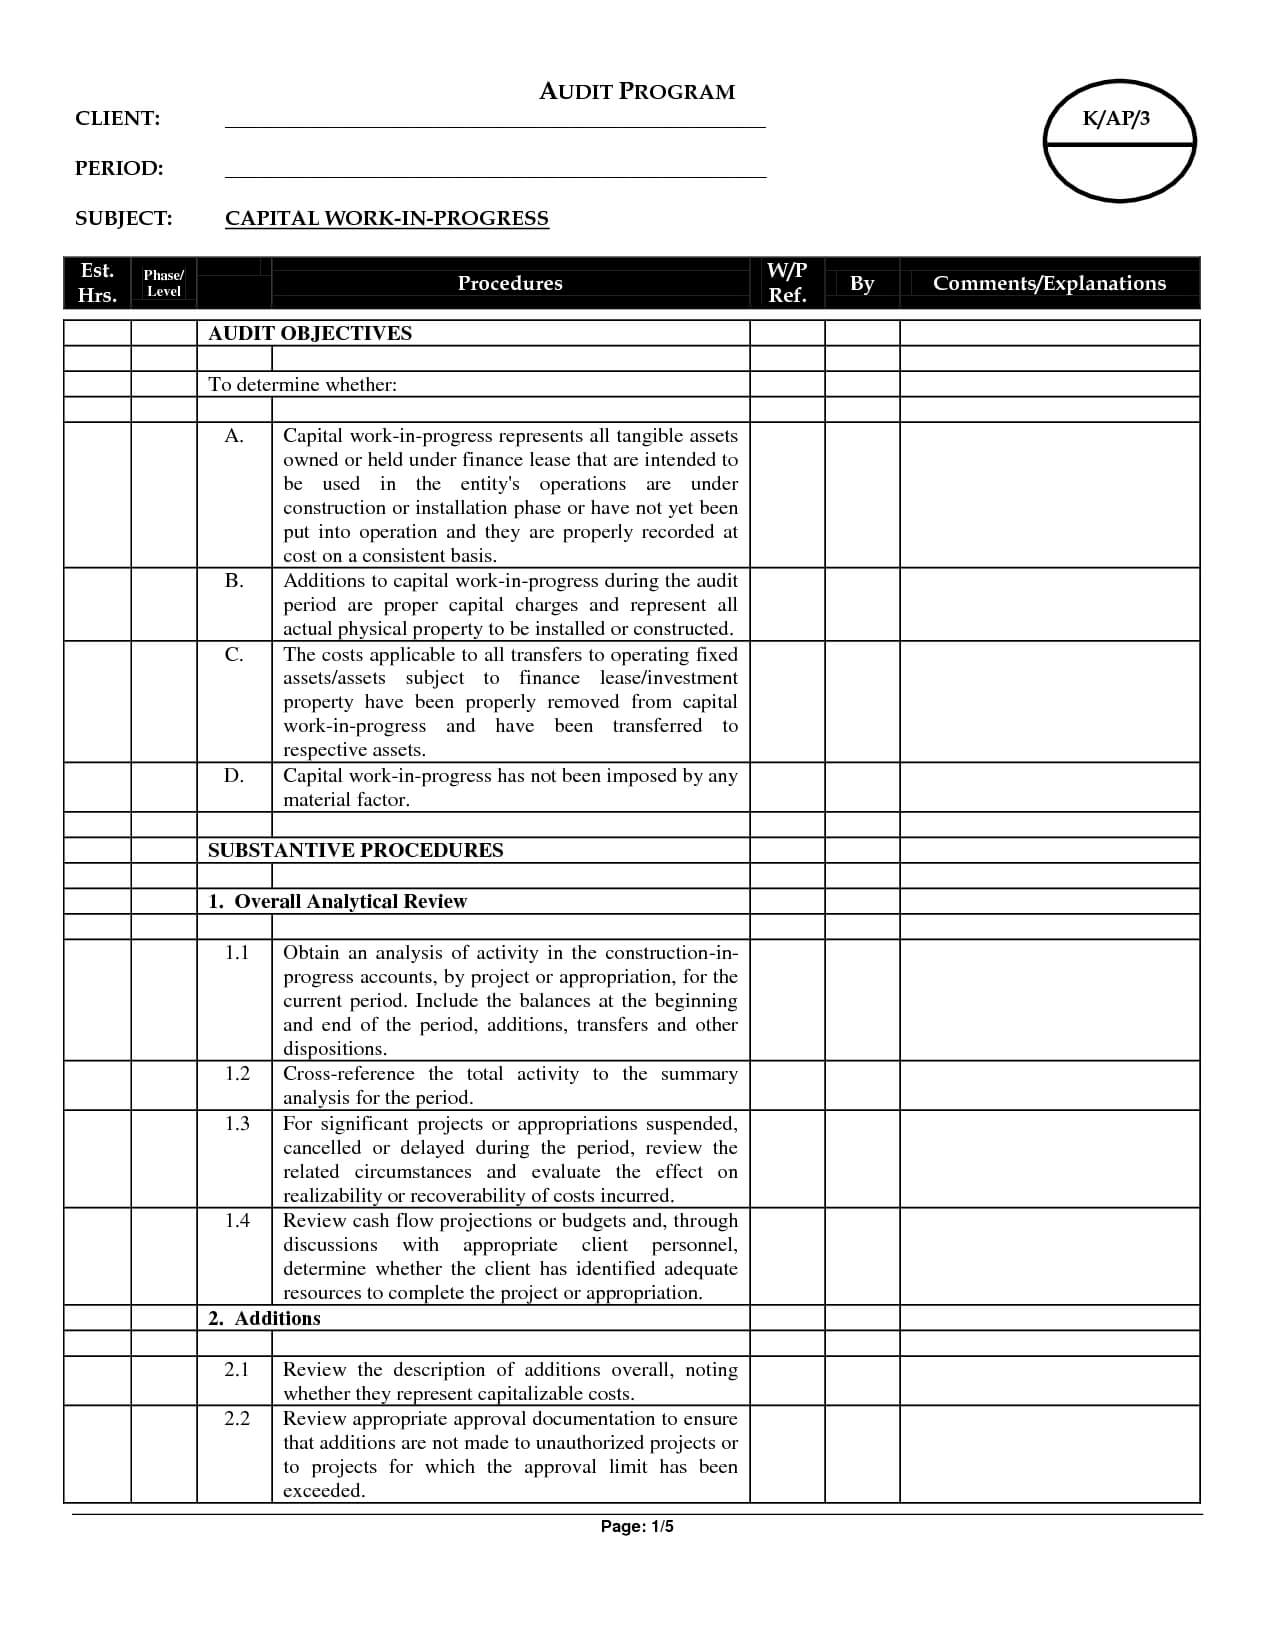 site safety visit report template